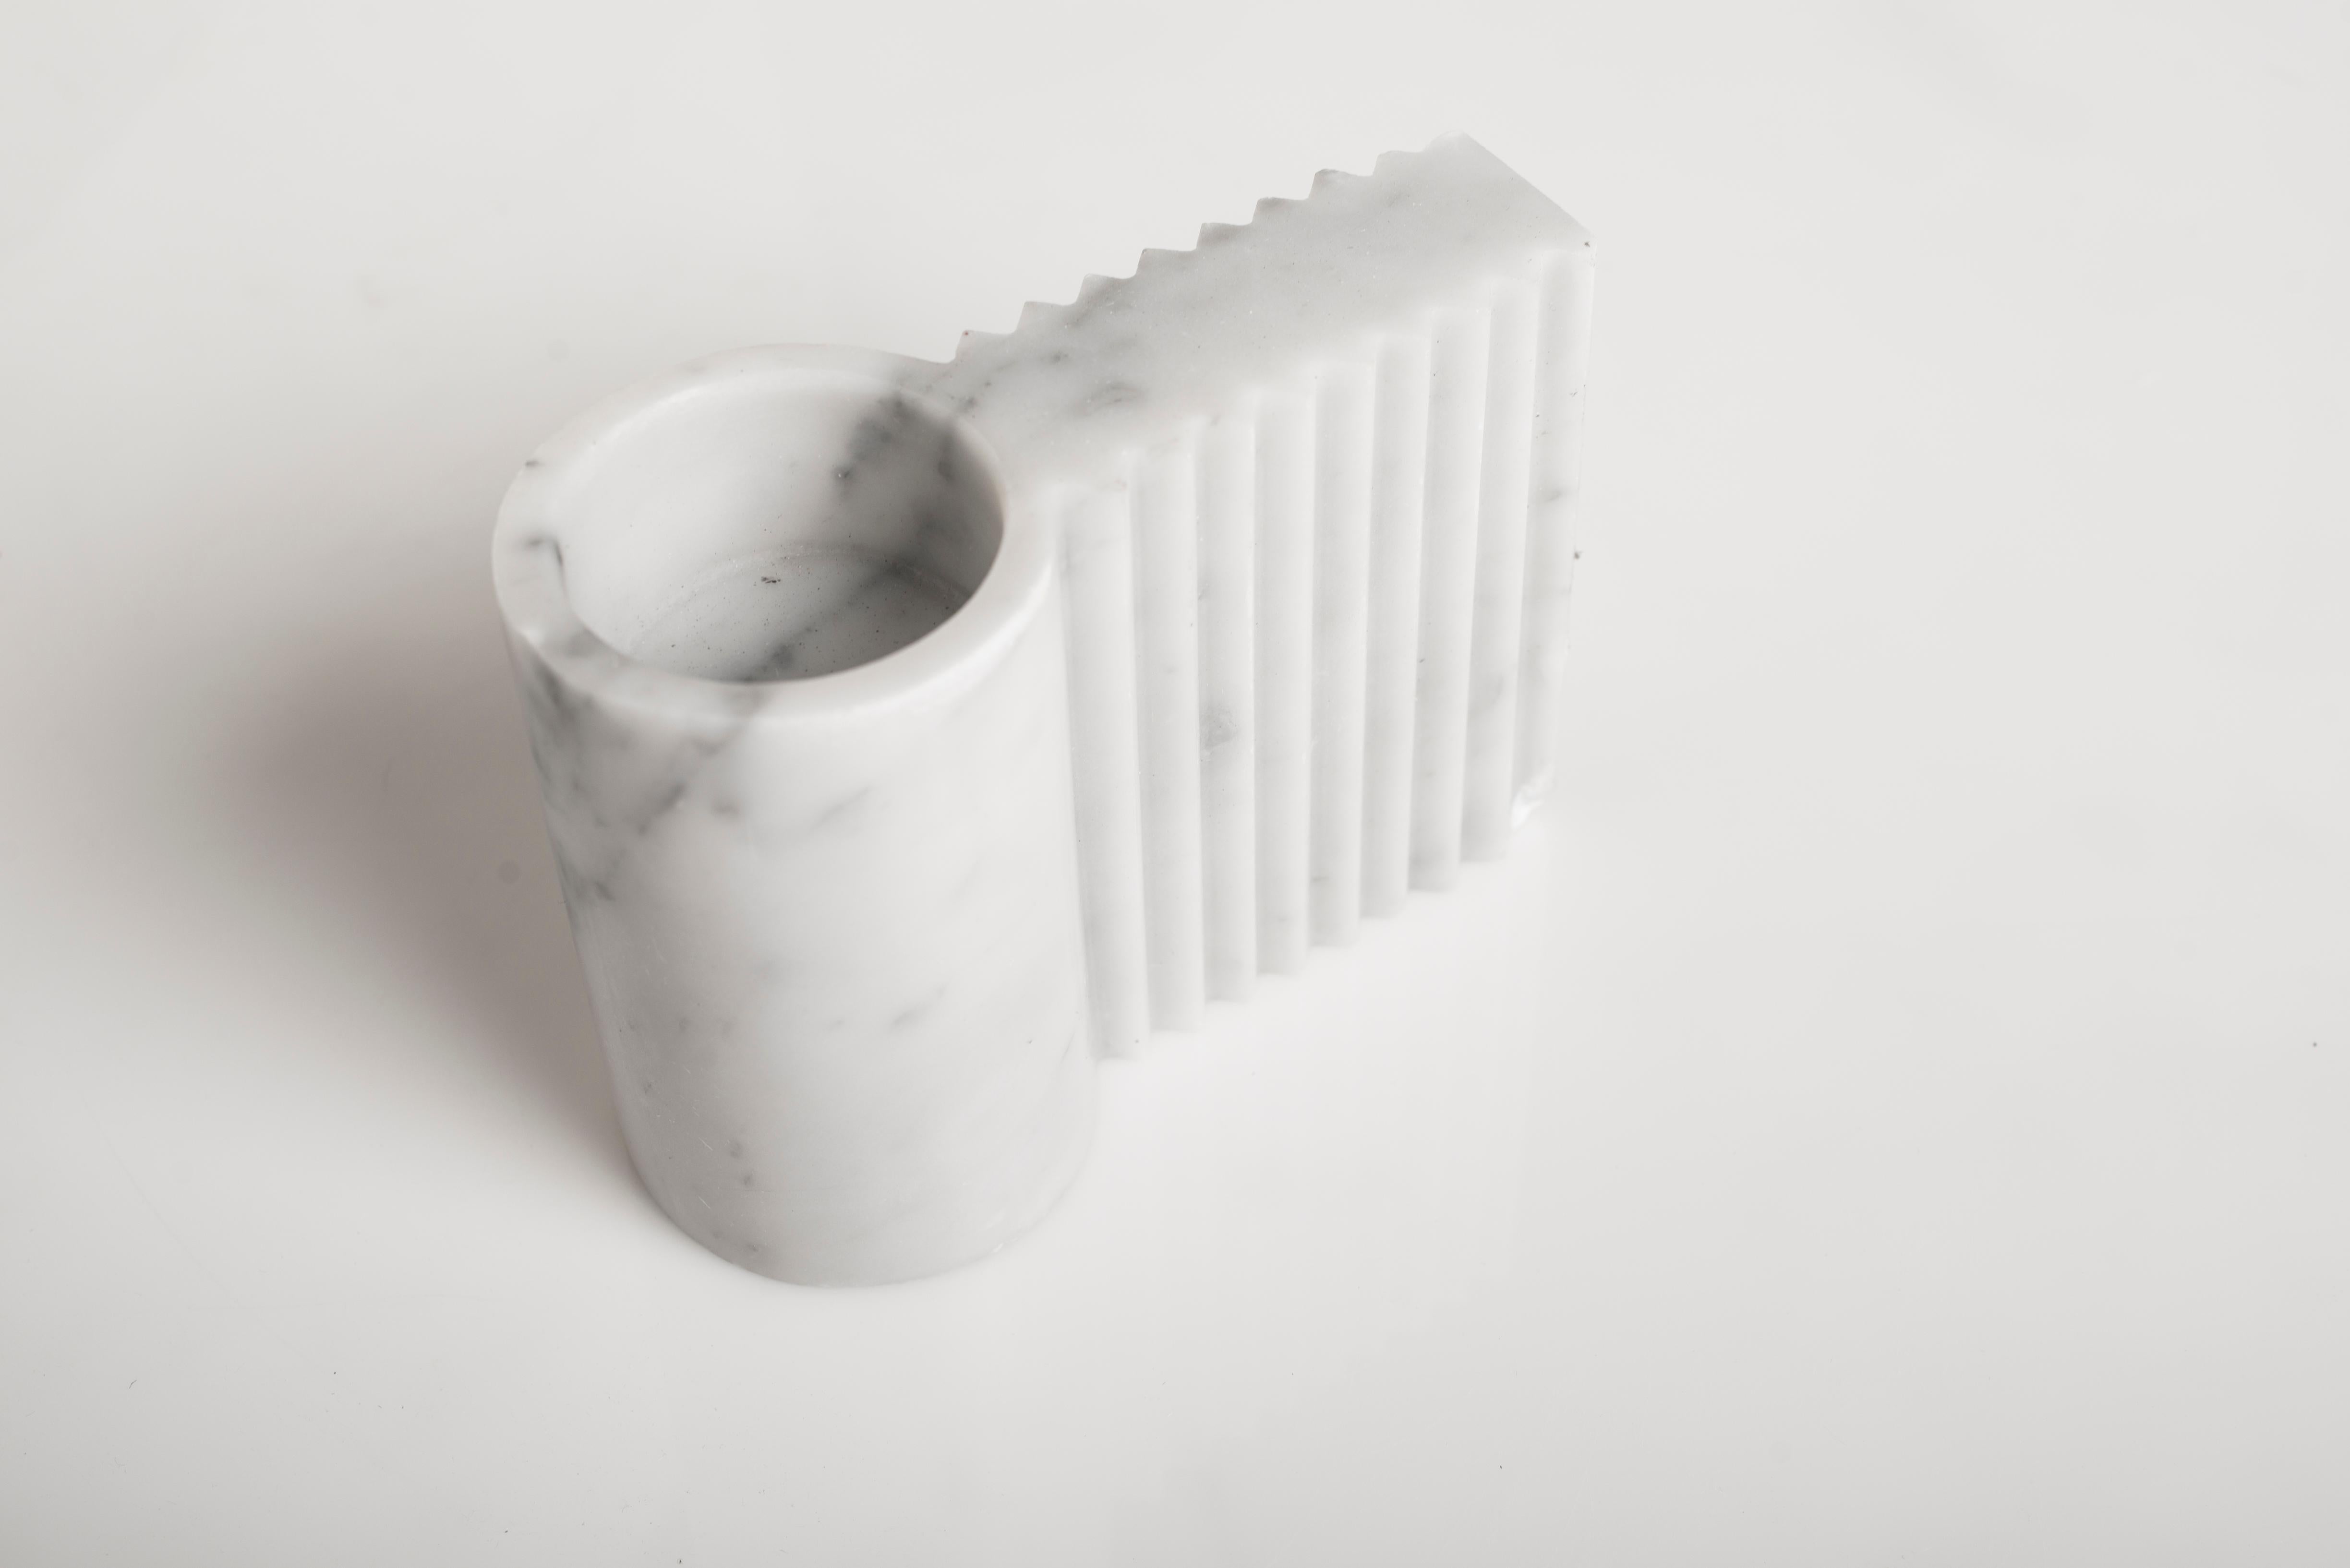 Kabul sculpture by Carlo Massoud.
Handmade. 
Dimensions: D 7 x W 15.6 x H 12 cm 
Materials: Carrara Marble

Carlo Massoud’s work stems from his relentless questioning of social, political, cultural, and environmental norms. He often pushes his